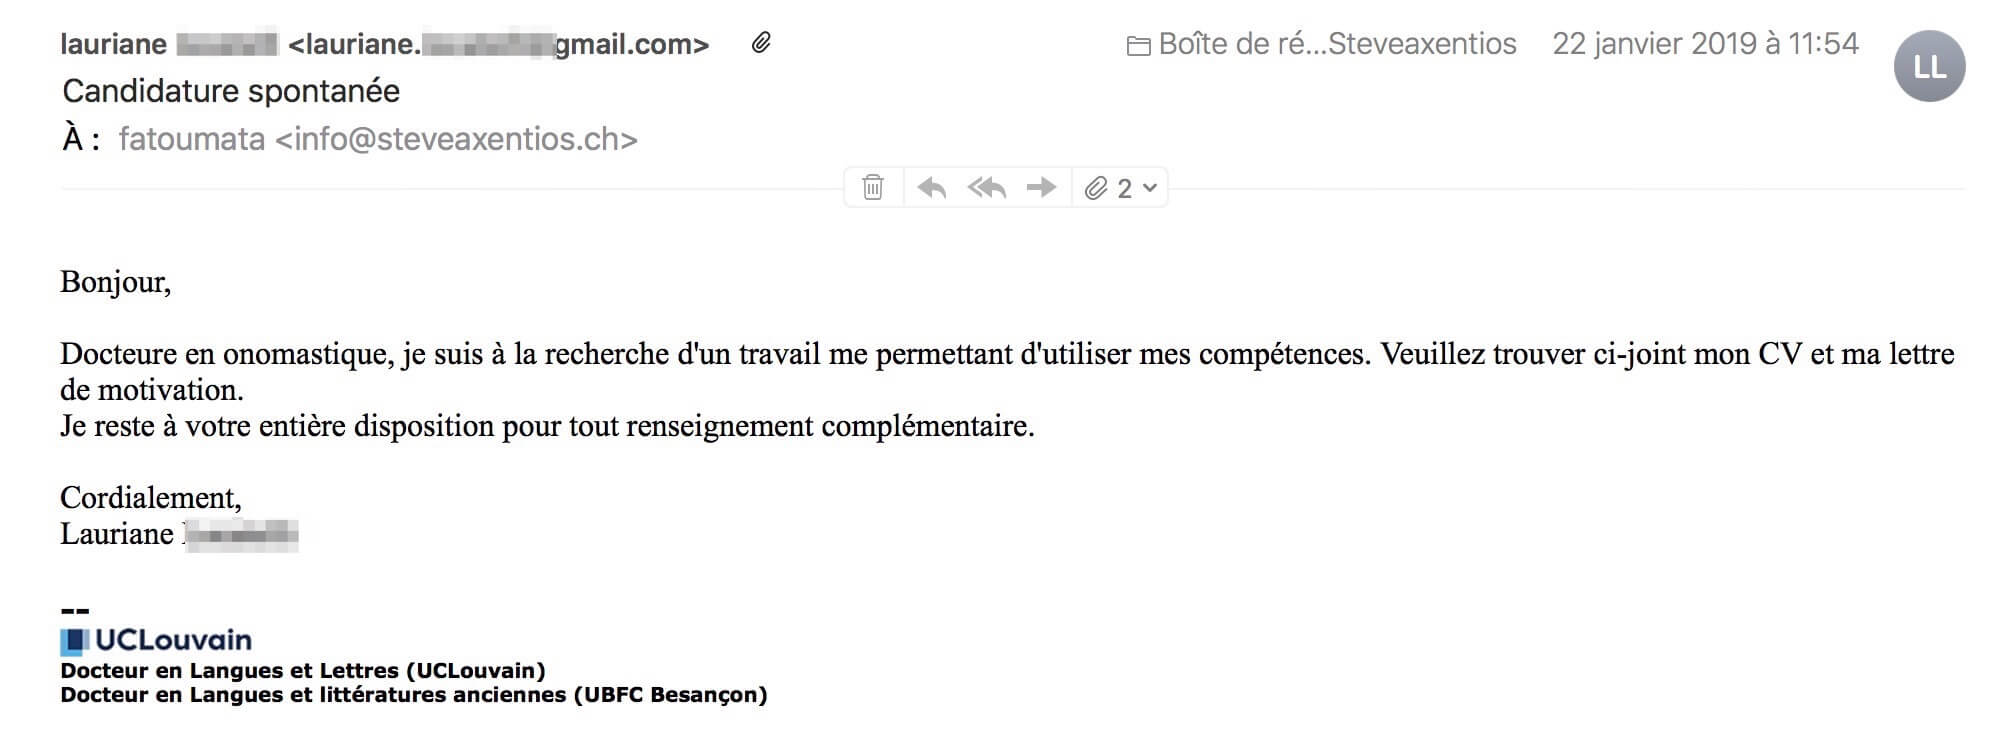 Email Pour Candidature Spontanee